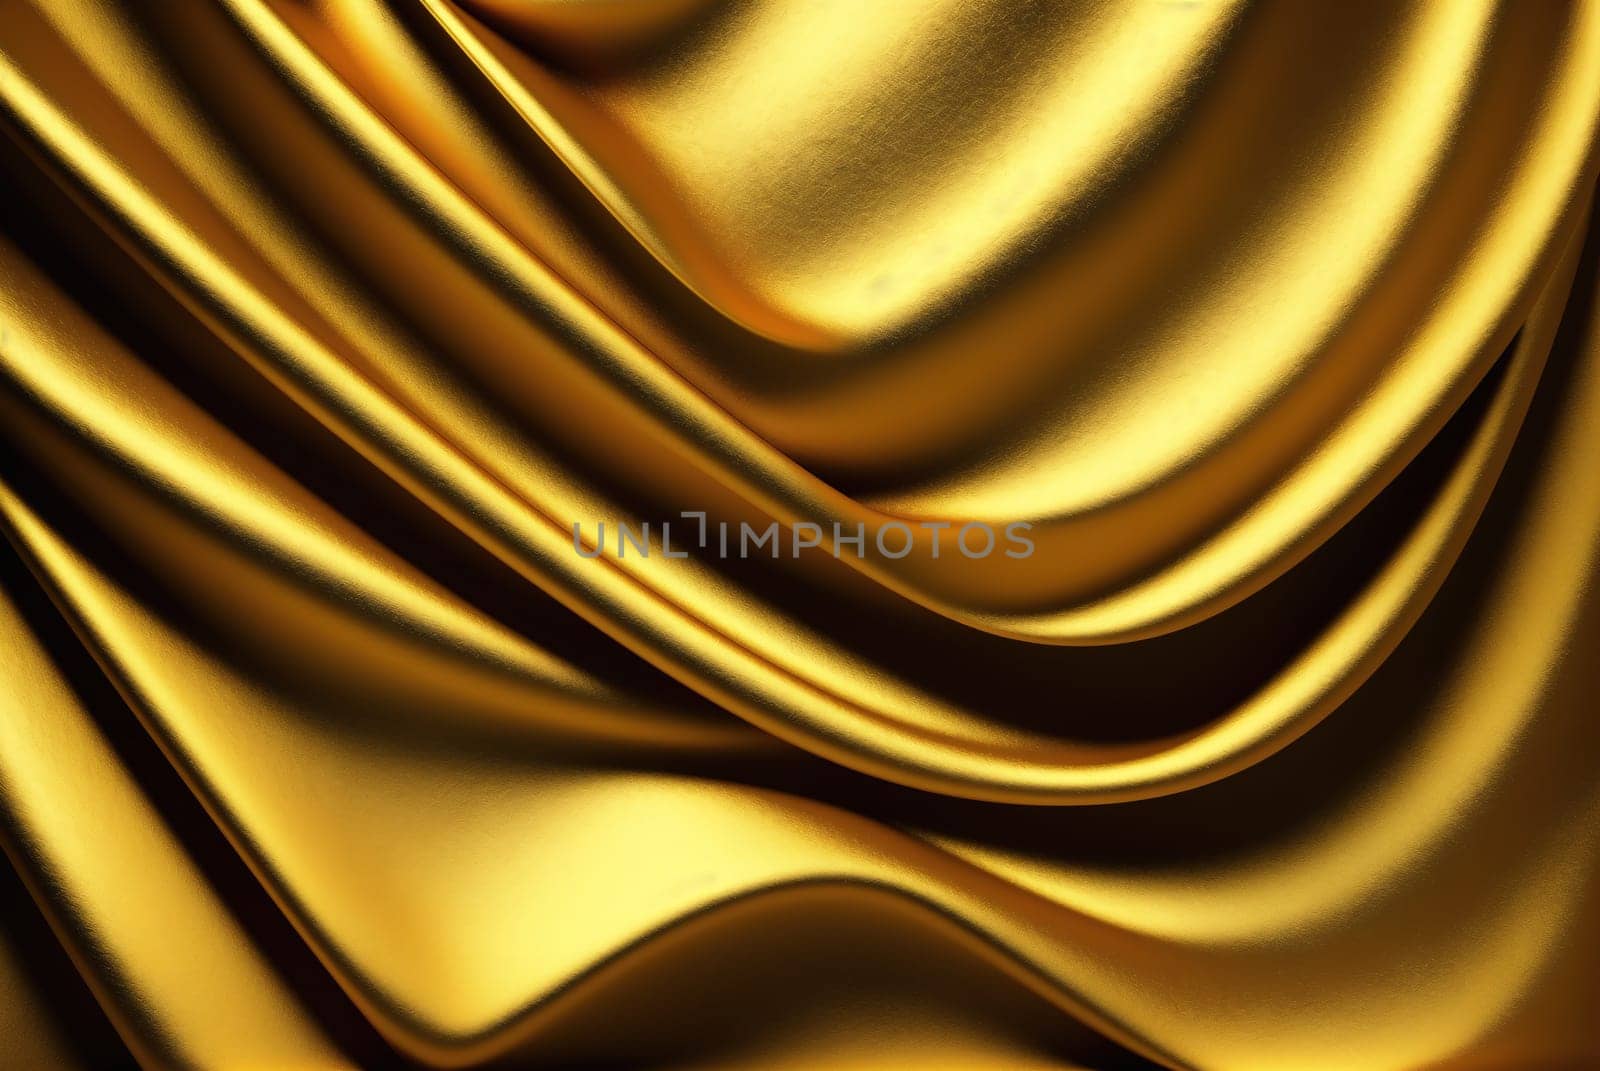 A close-up of a golden fabric with a smooth, curved texture. by creart